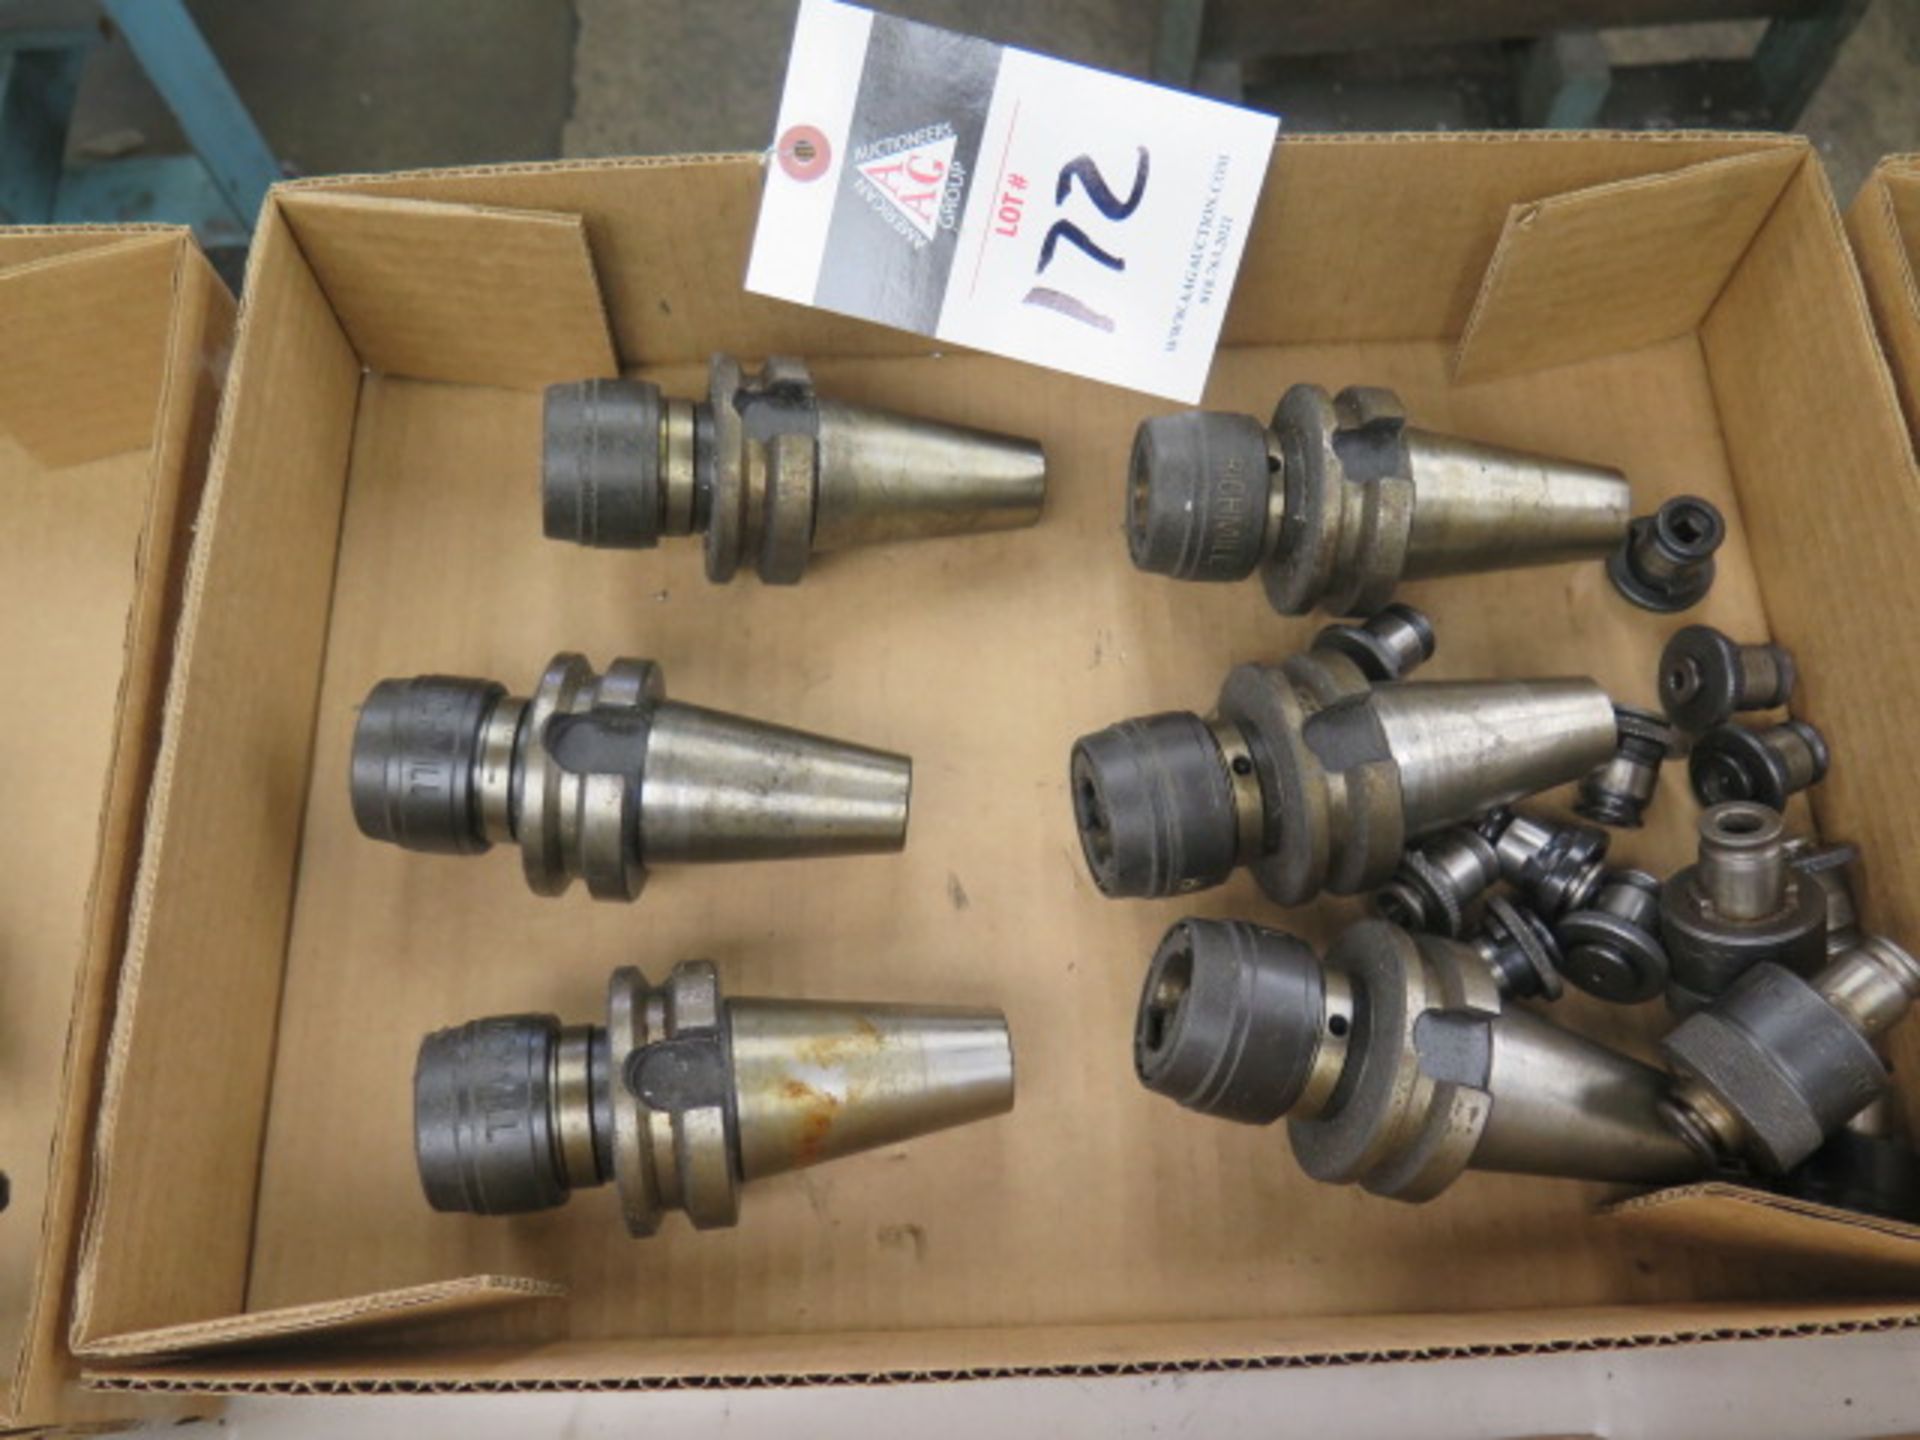 BT-40 Taper Tapping Heads (6) w/ Tap Holders (SOLD AS-IS - NO WARRANTY)